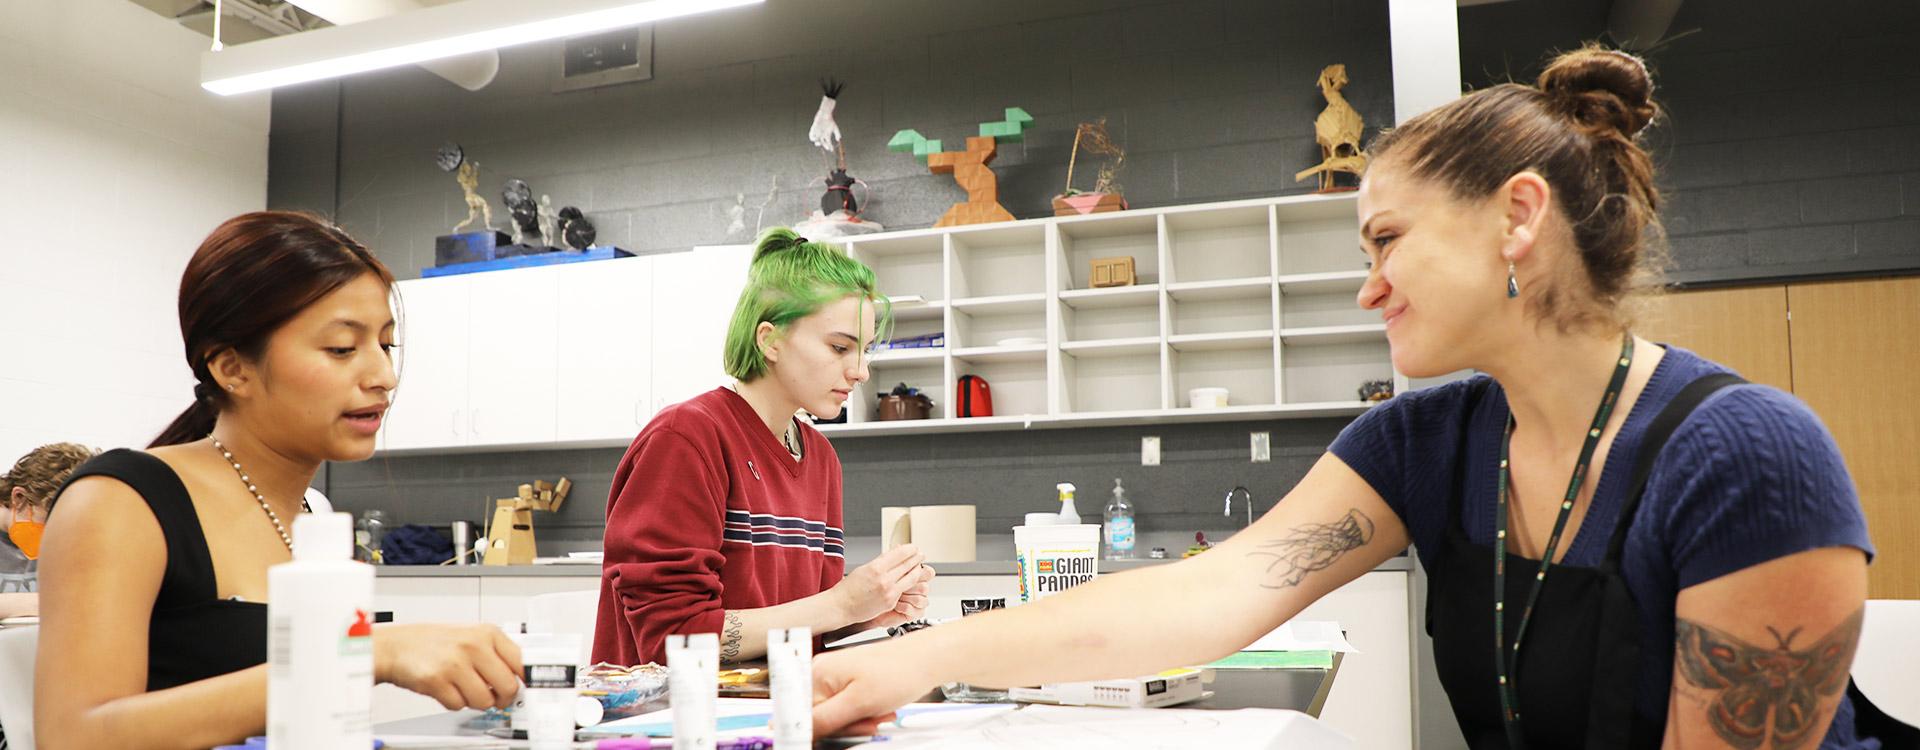 instructor converses with students about their painting projects in the fine arts studio